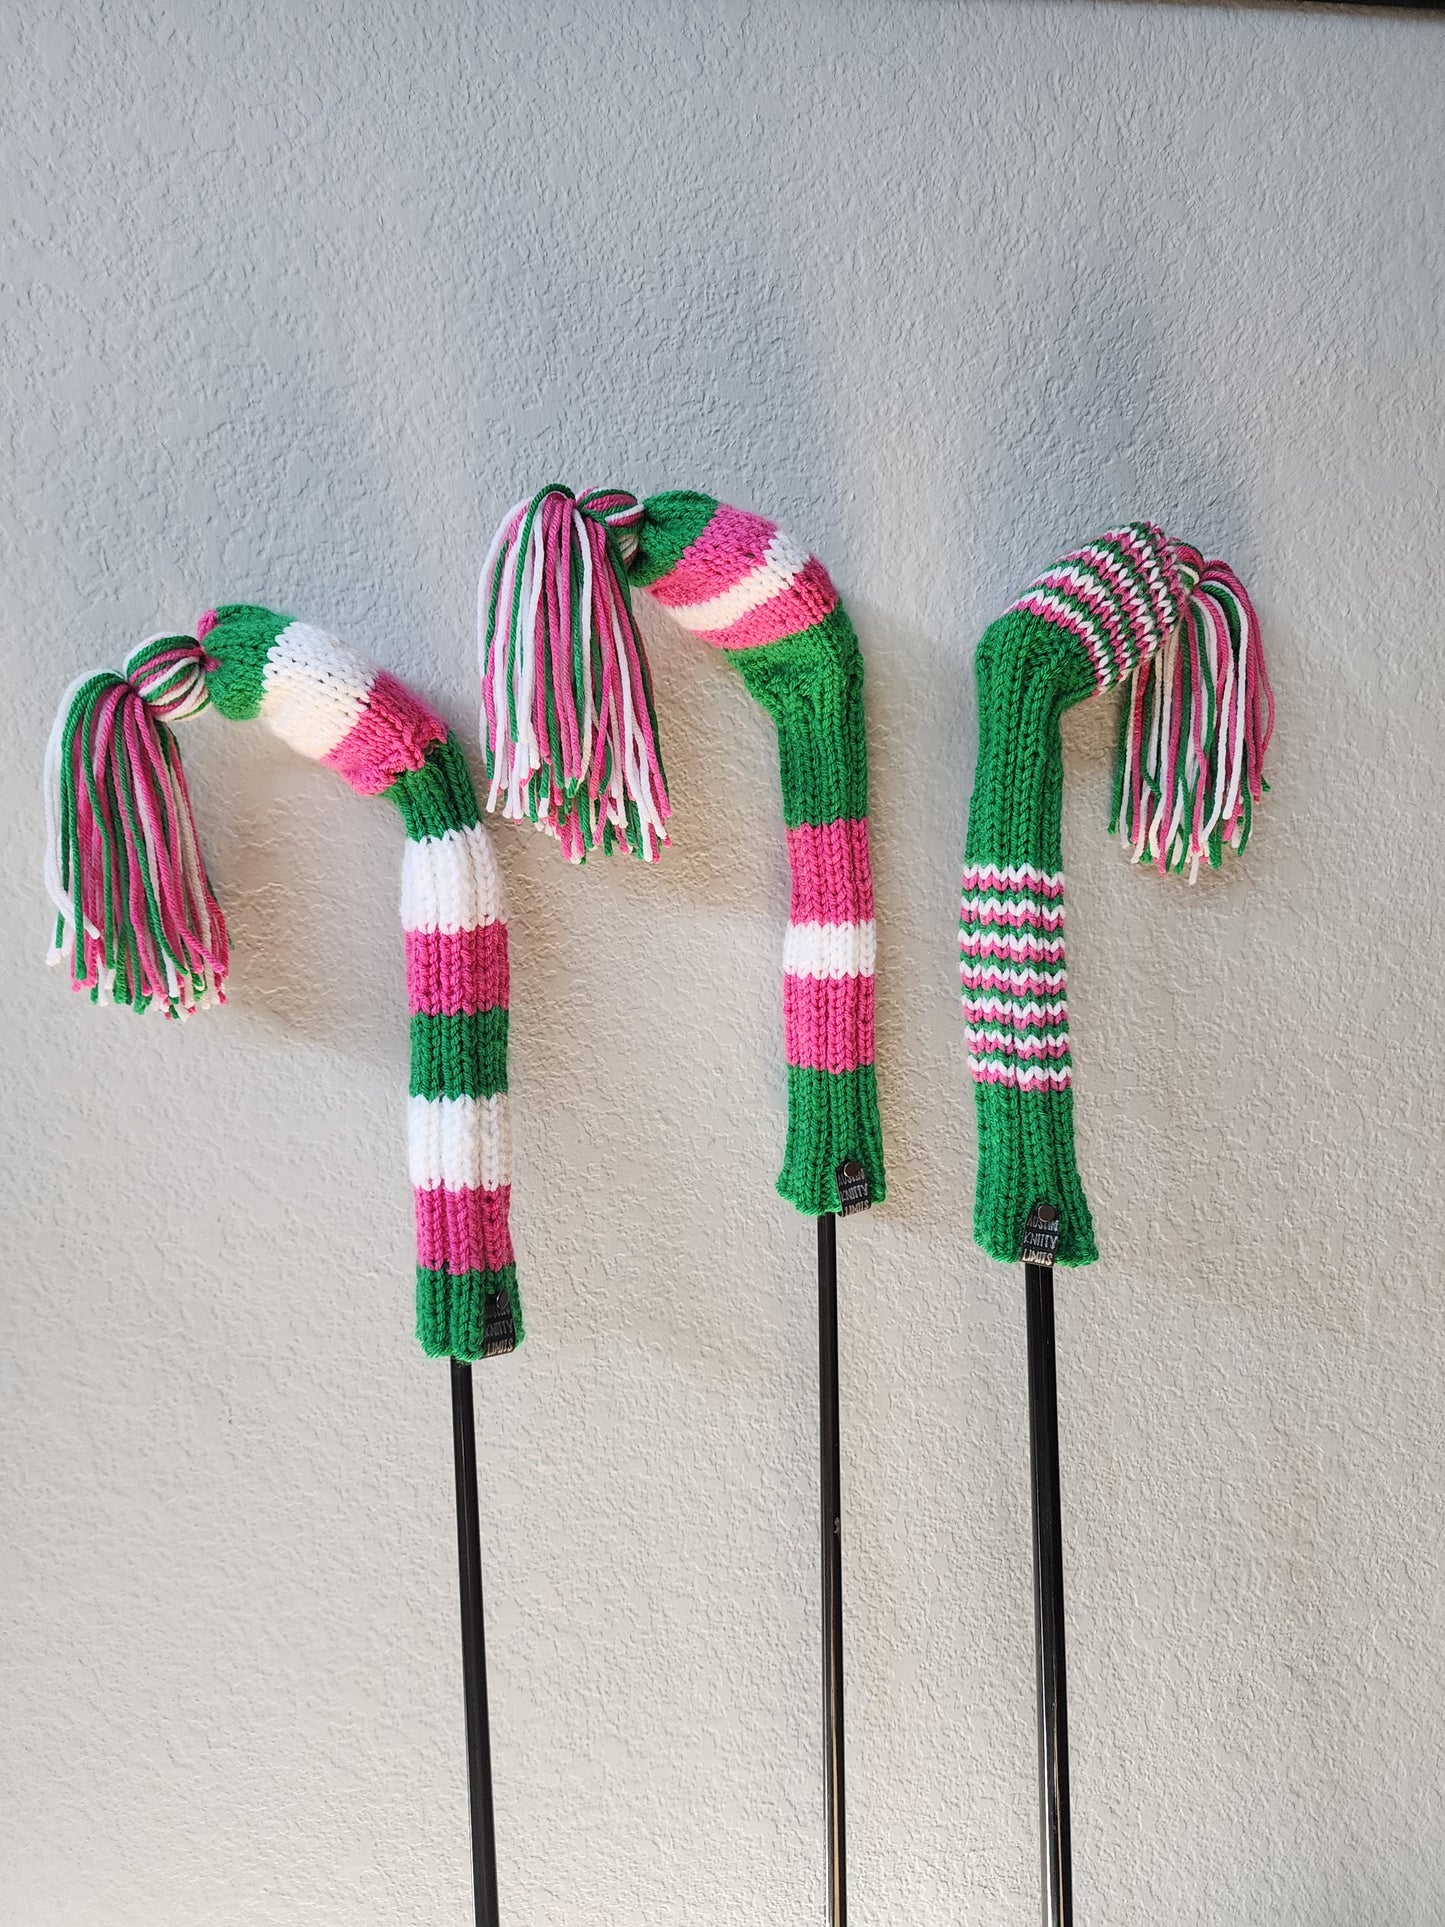 Three Hand Knit Golf Club Head Covers Retro-Vintage Pink, Green & White with Tassels for Drivers, Woods - Austinknittylimits